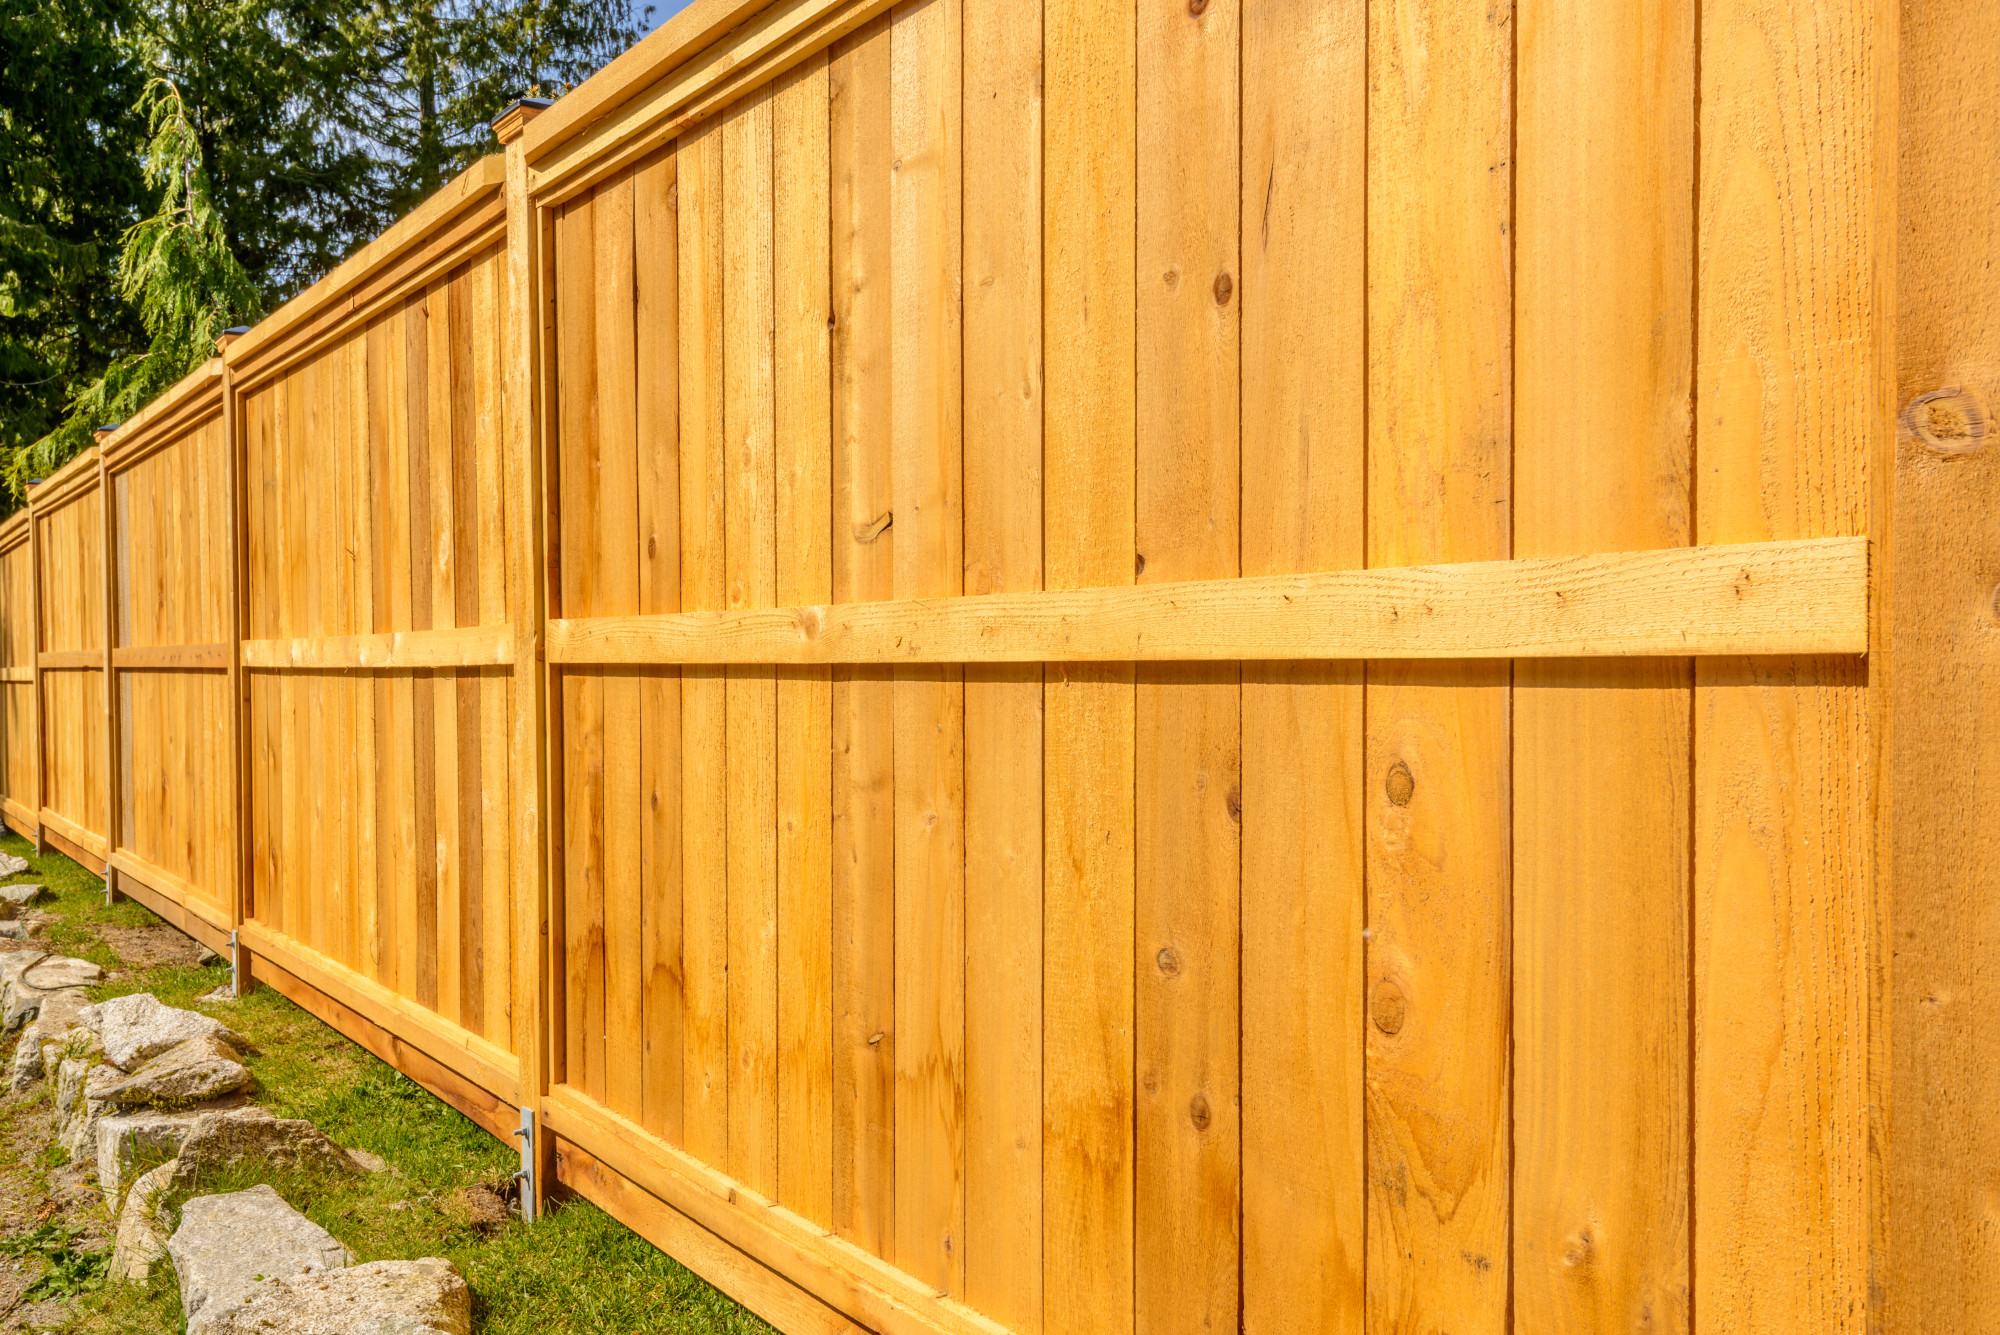 Is a Horizontal Fence Better Than a Vertical Fence?